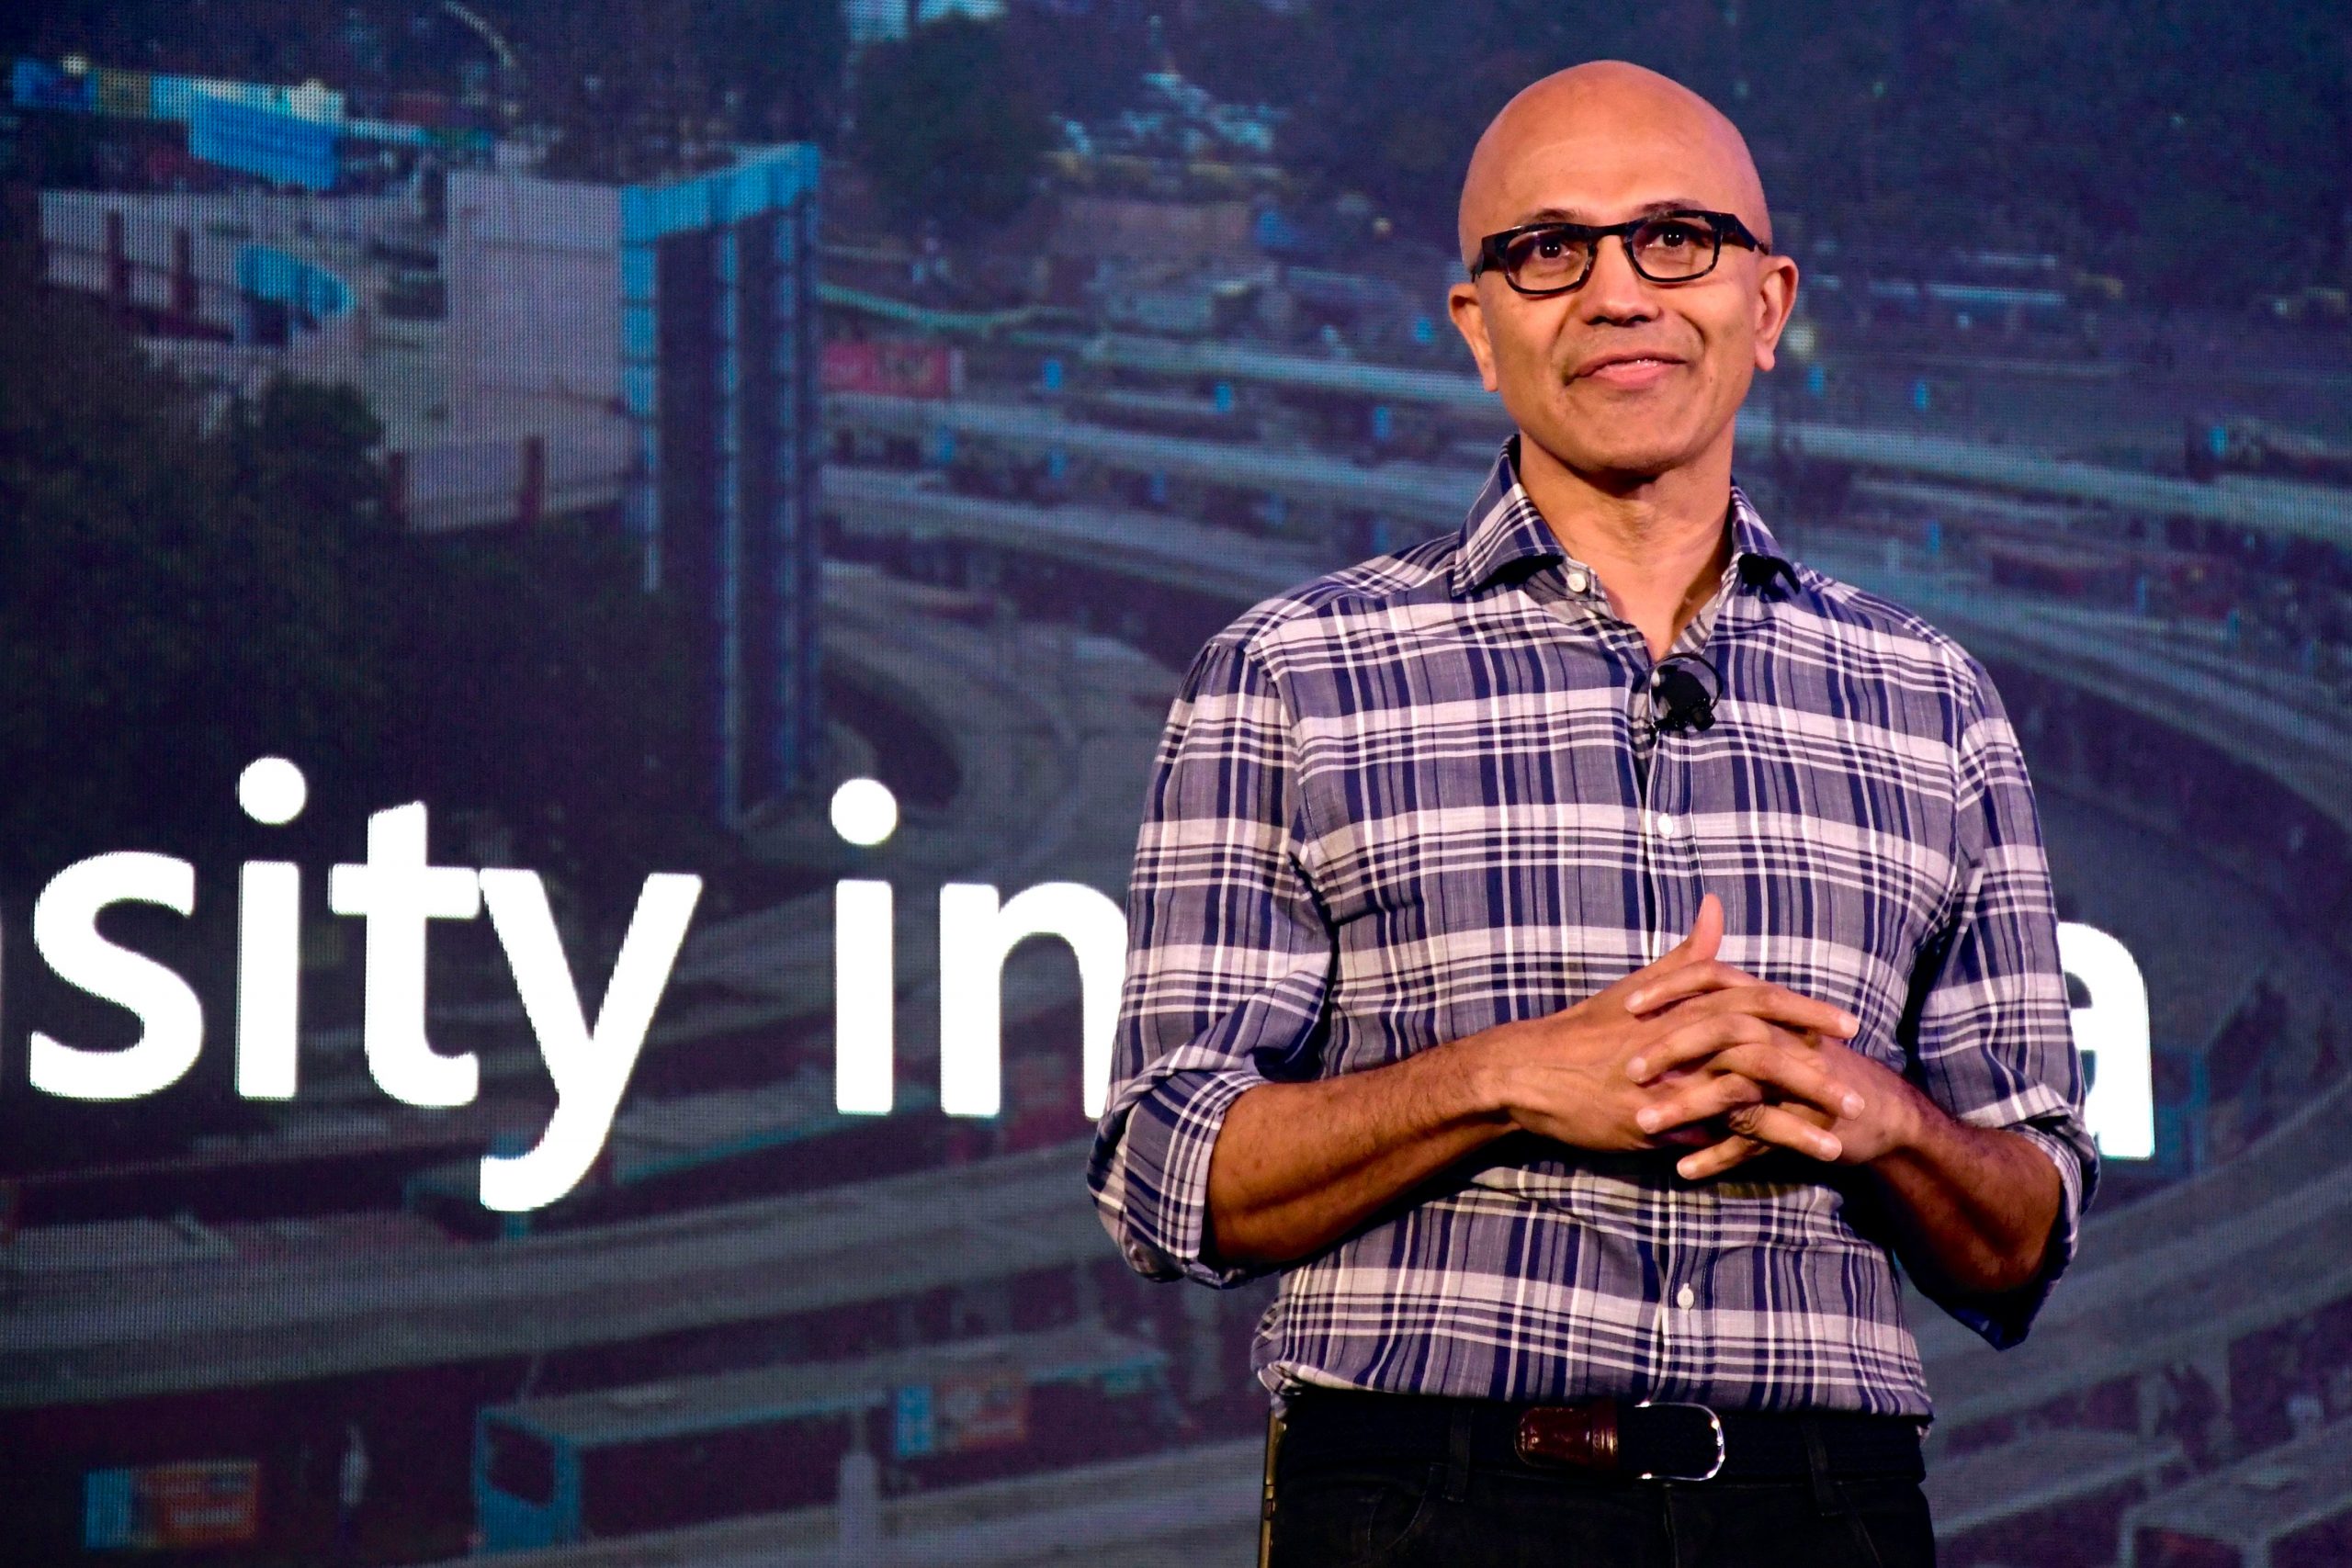 Satya Nadella stand on stage wearing a purple and white checkered shirt.